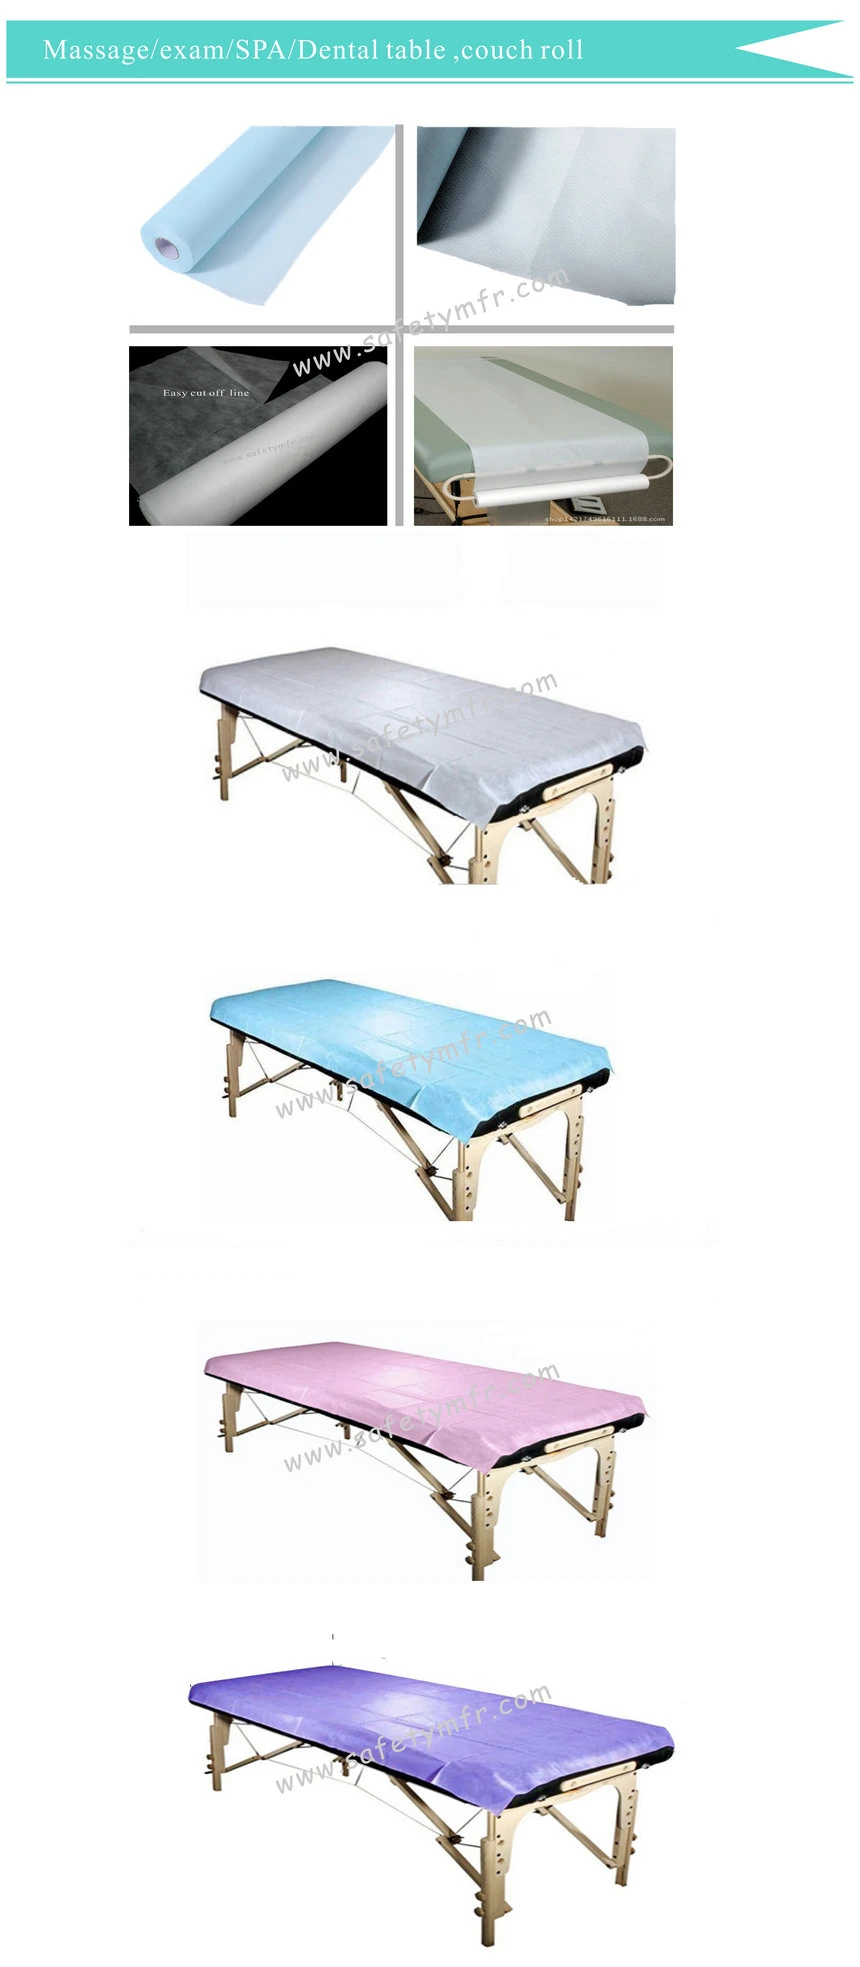 SPA/Salon/Hospital/medial/dental/clinic/ Perforated Exam Table Disposable Nonwoven bedsheet Roll